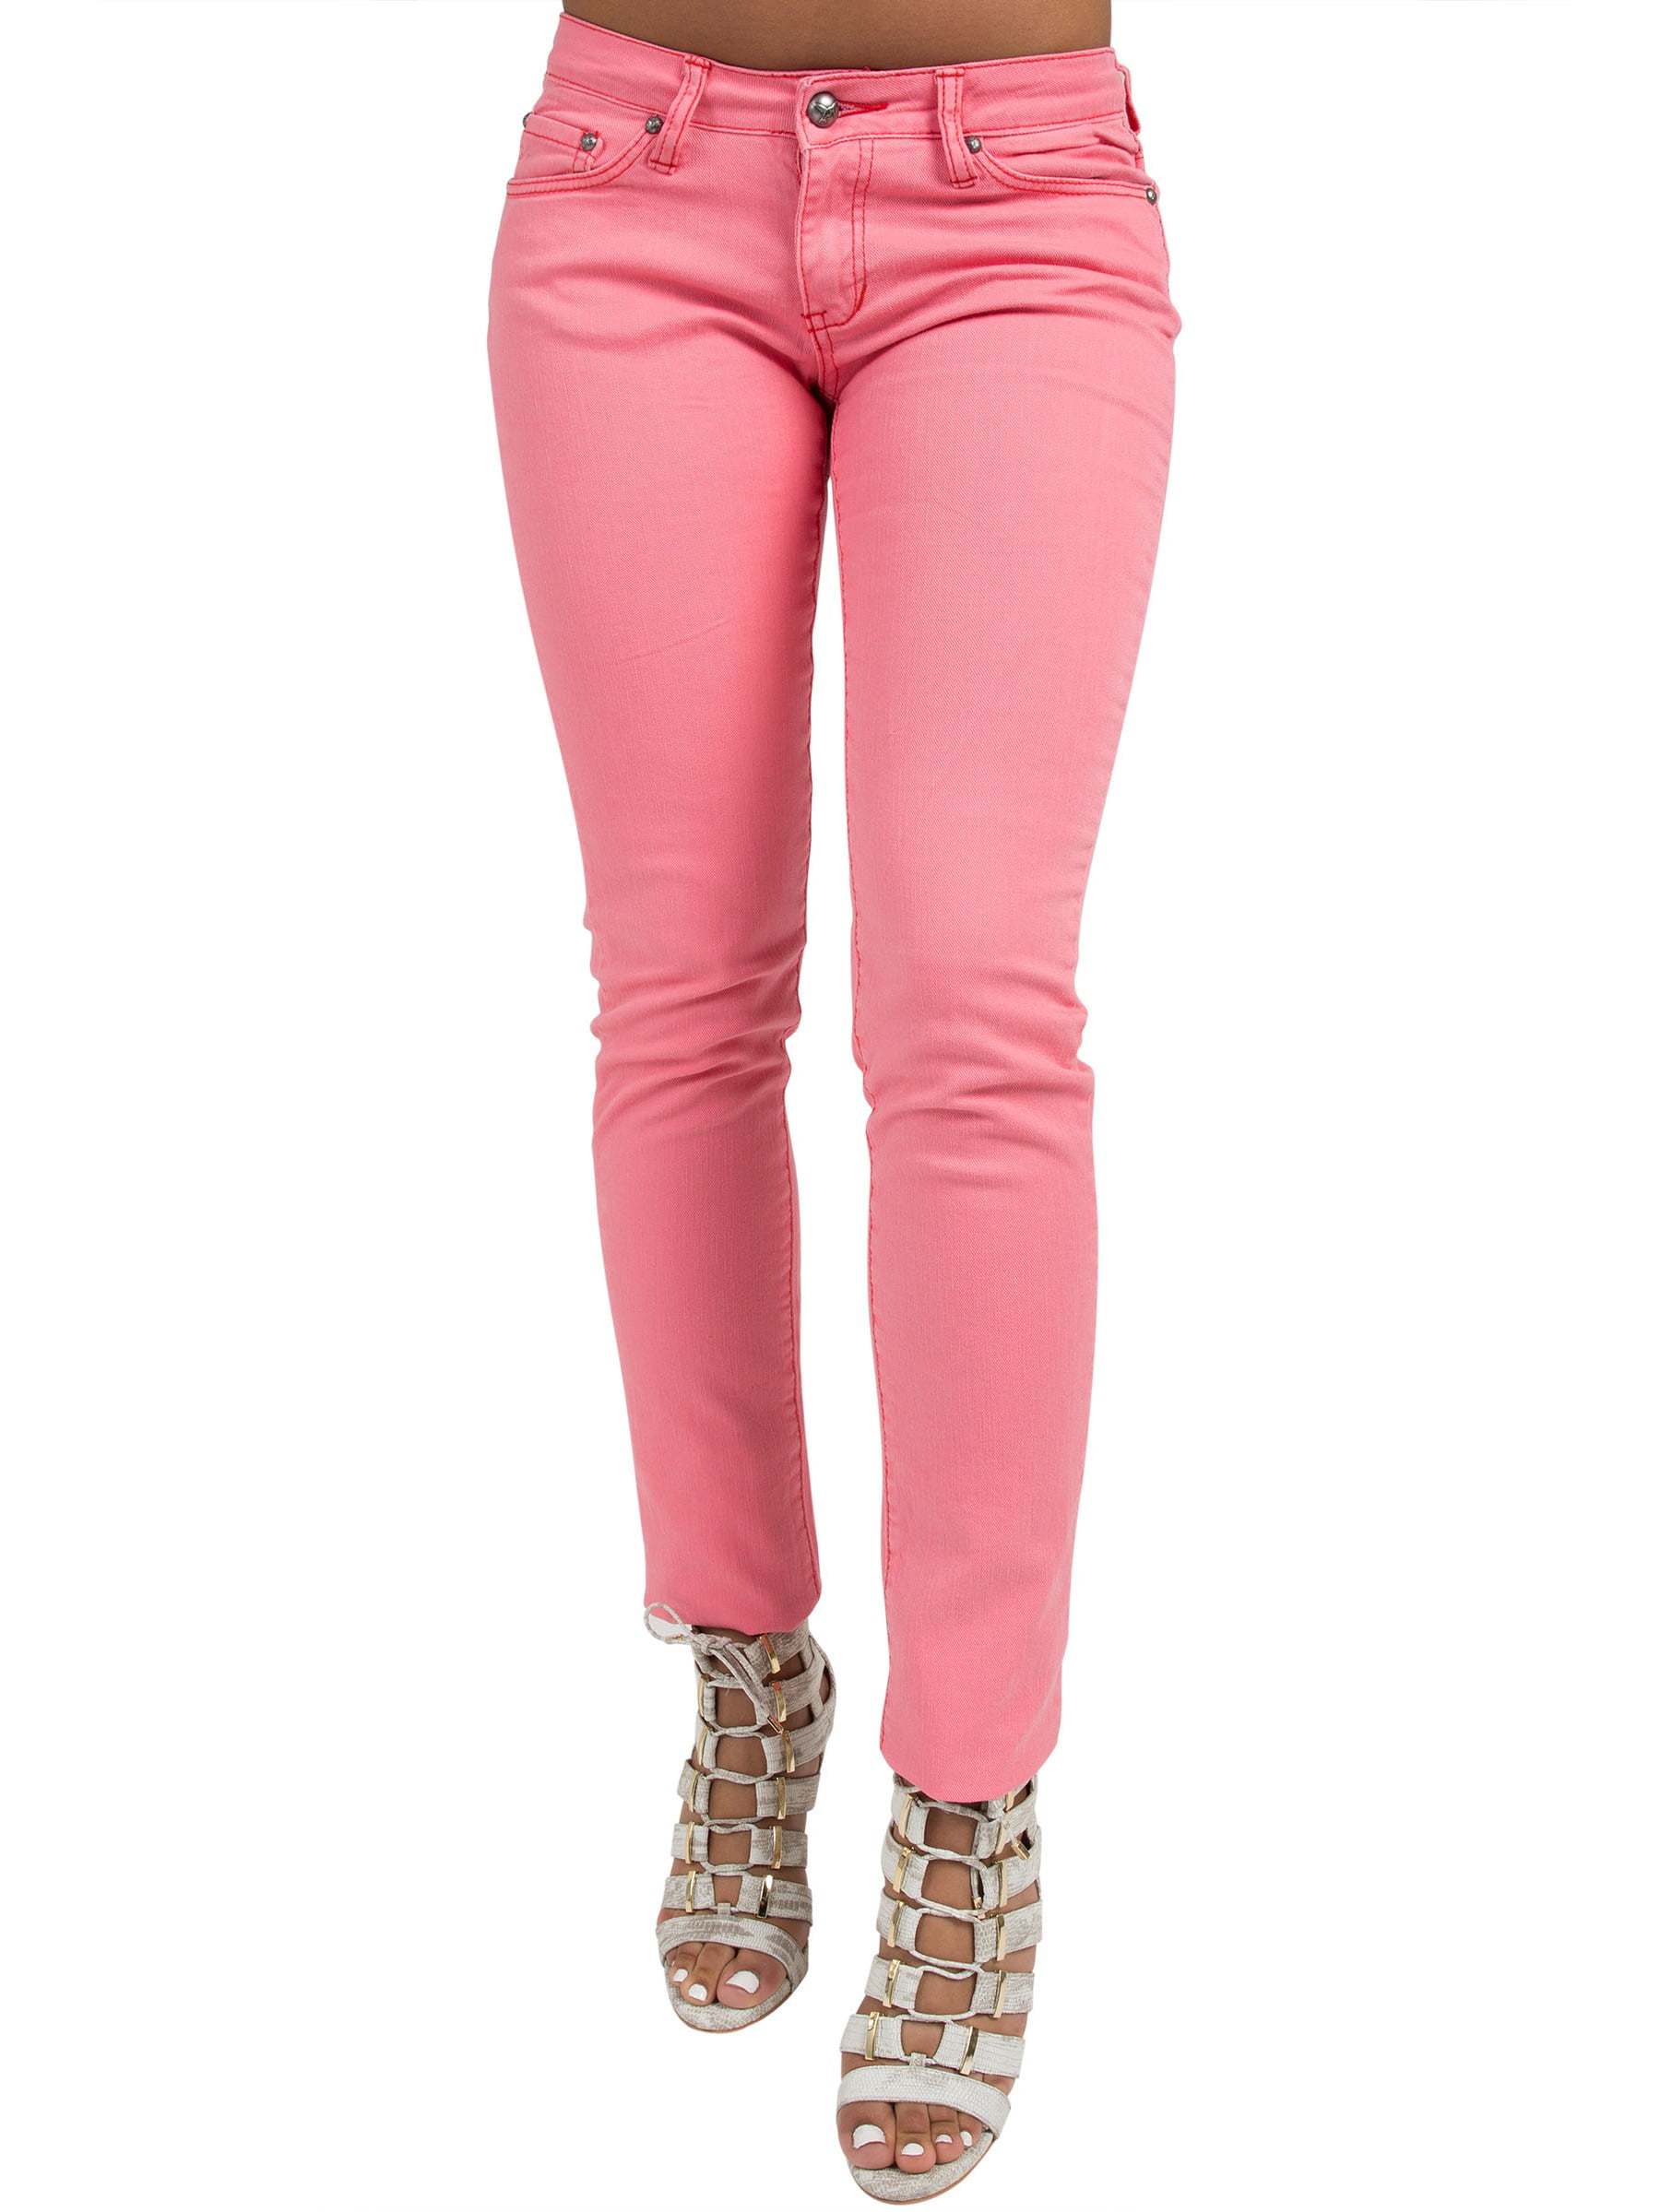 S & P - S & P Women's Contemporary Hot Pink Stretch Denim Skinny Jeans ...